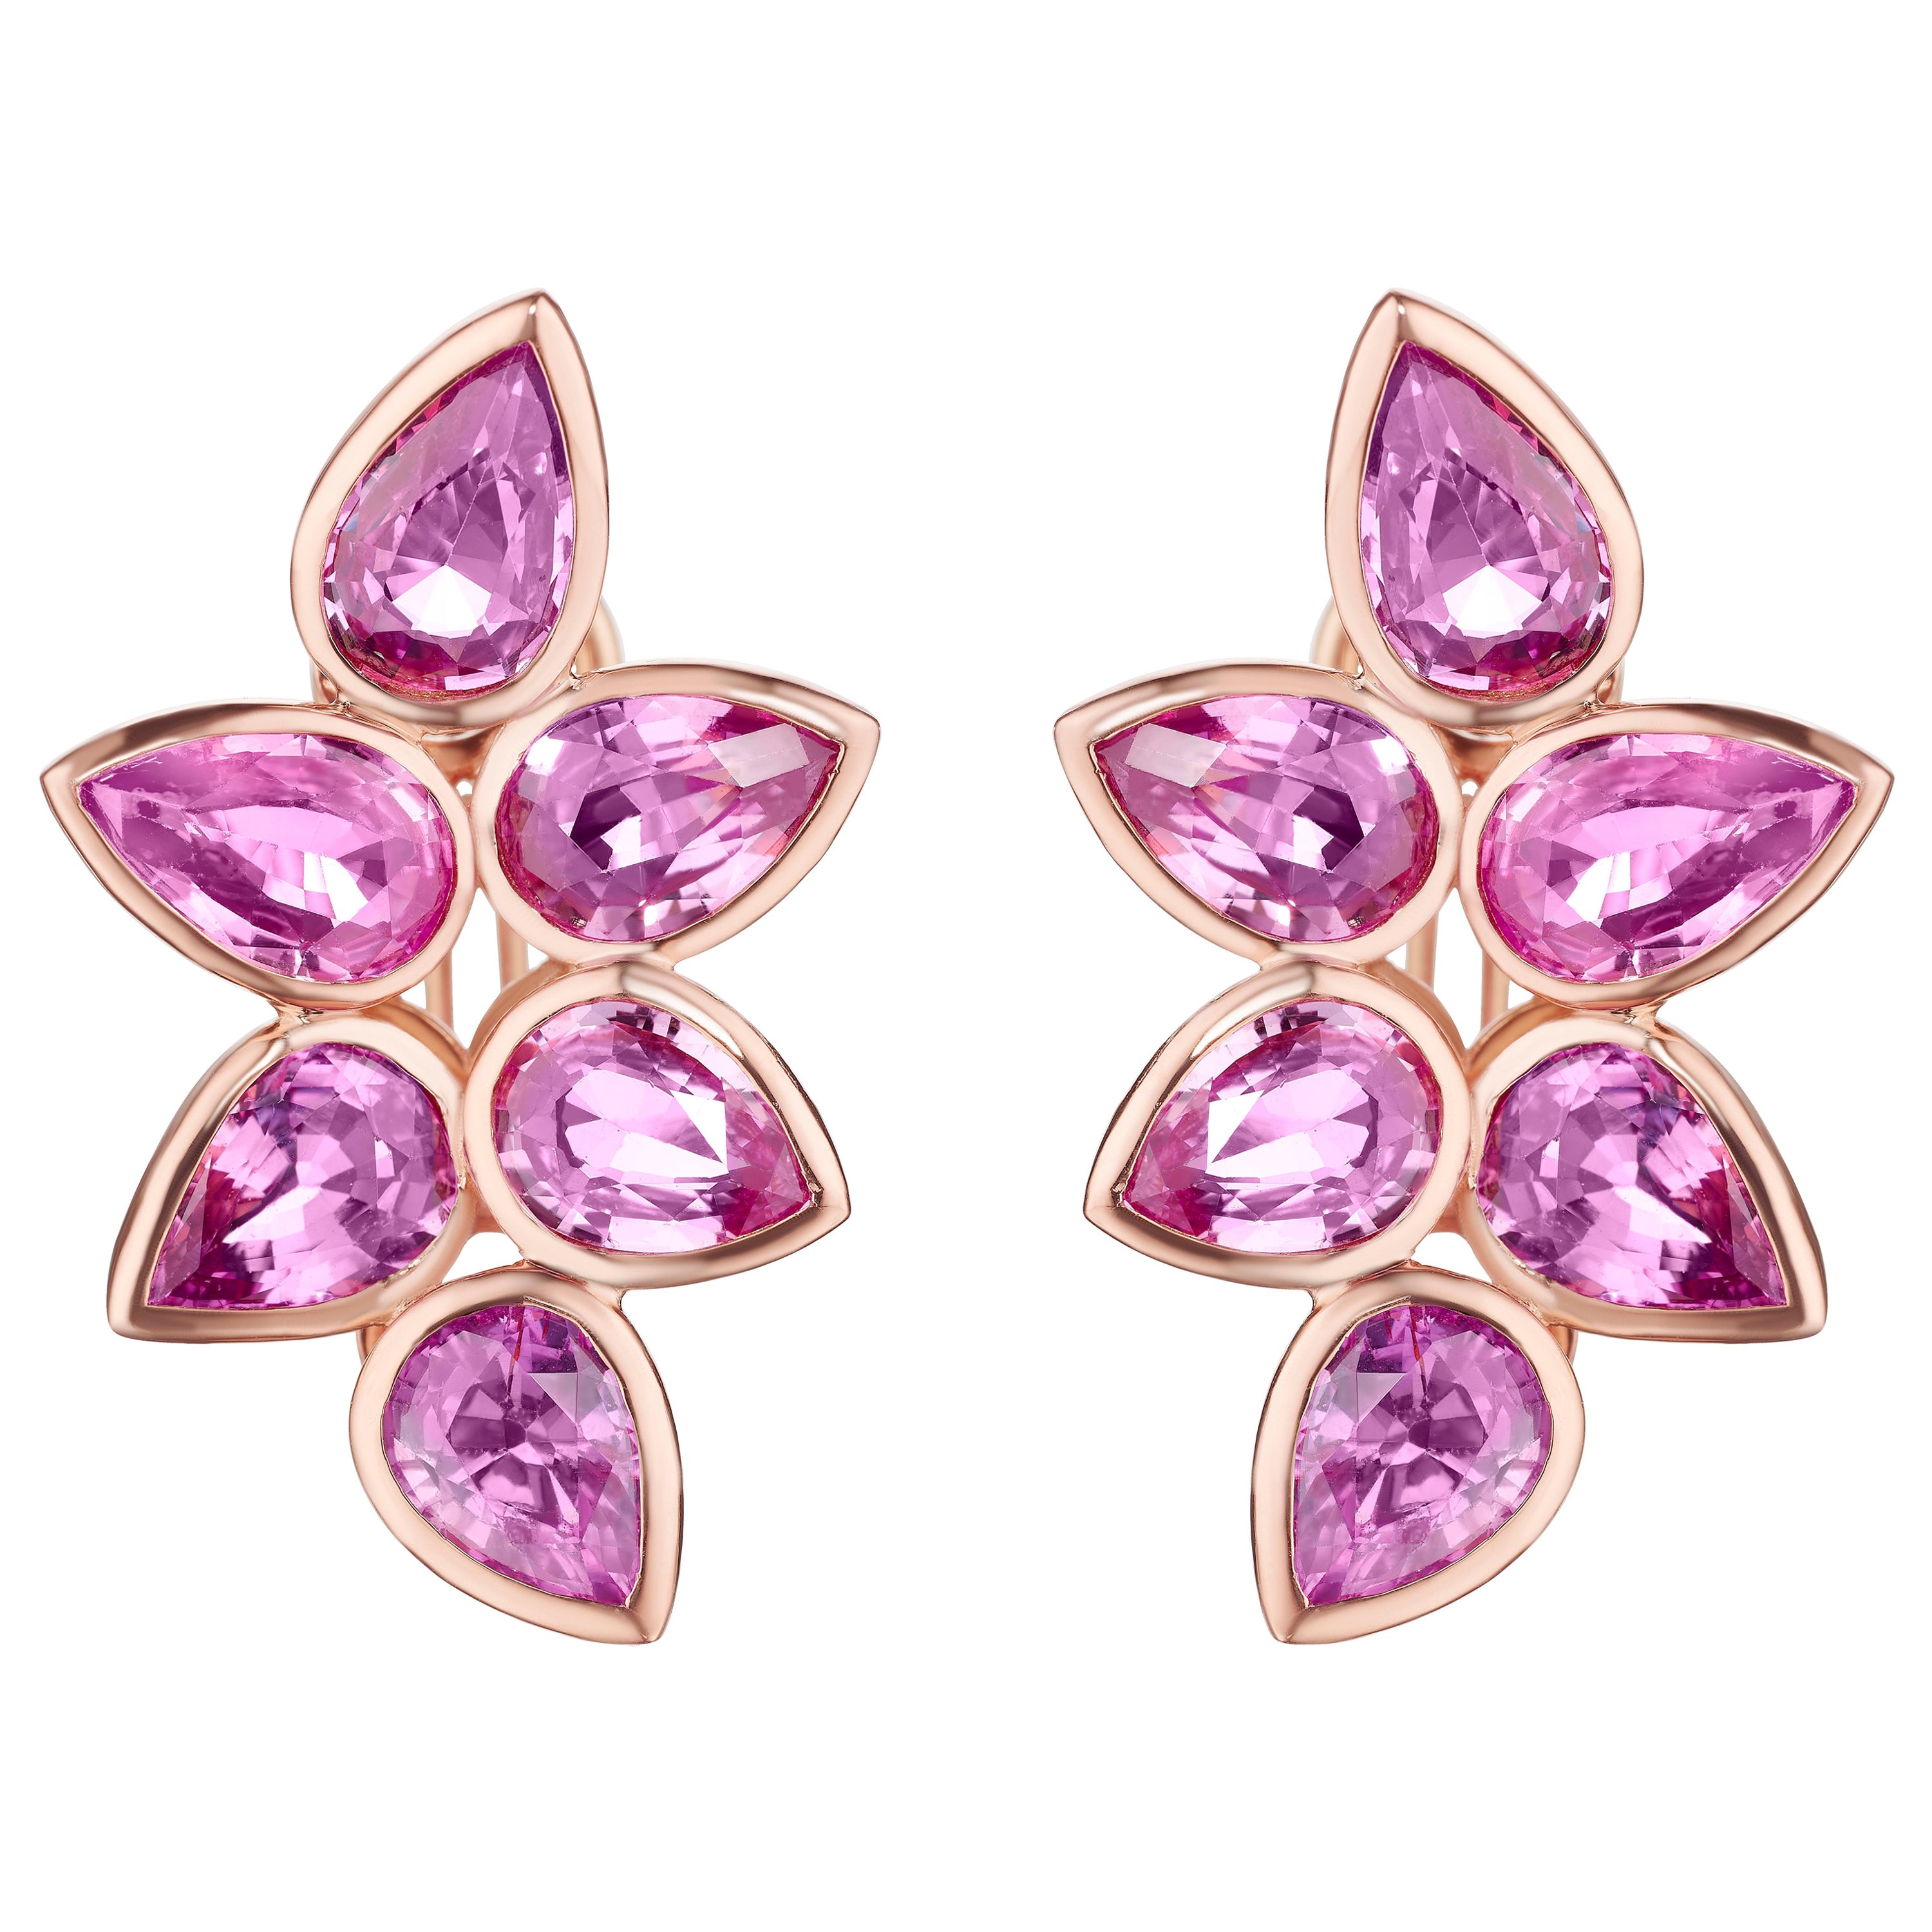 15.52 Carats Pear Shaped Pink Sapphires Cluster Earrings